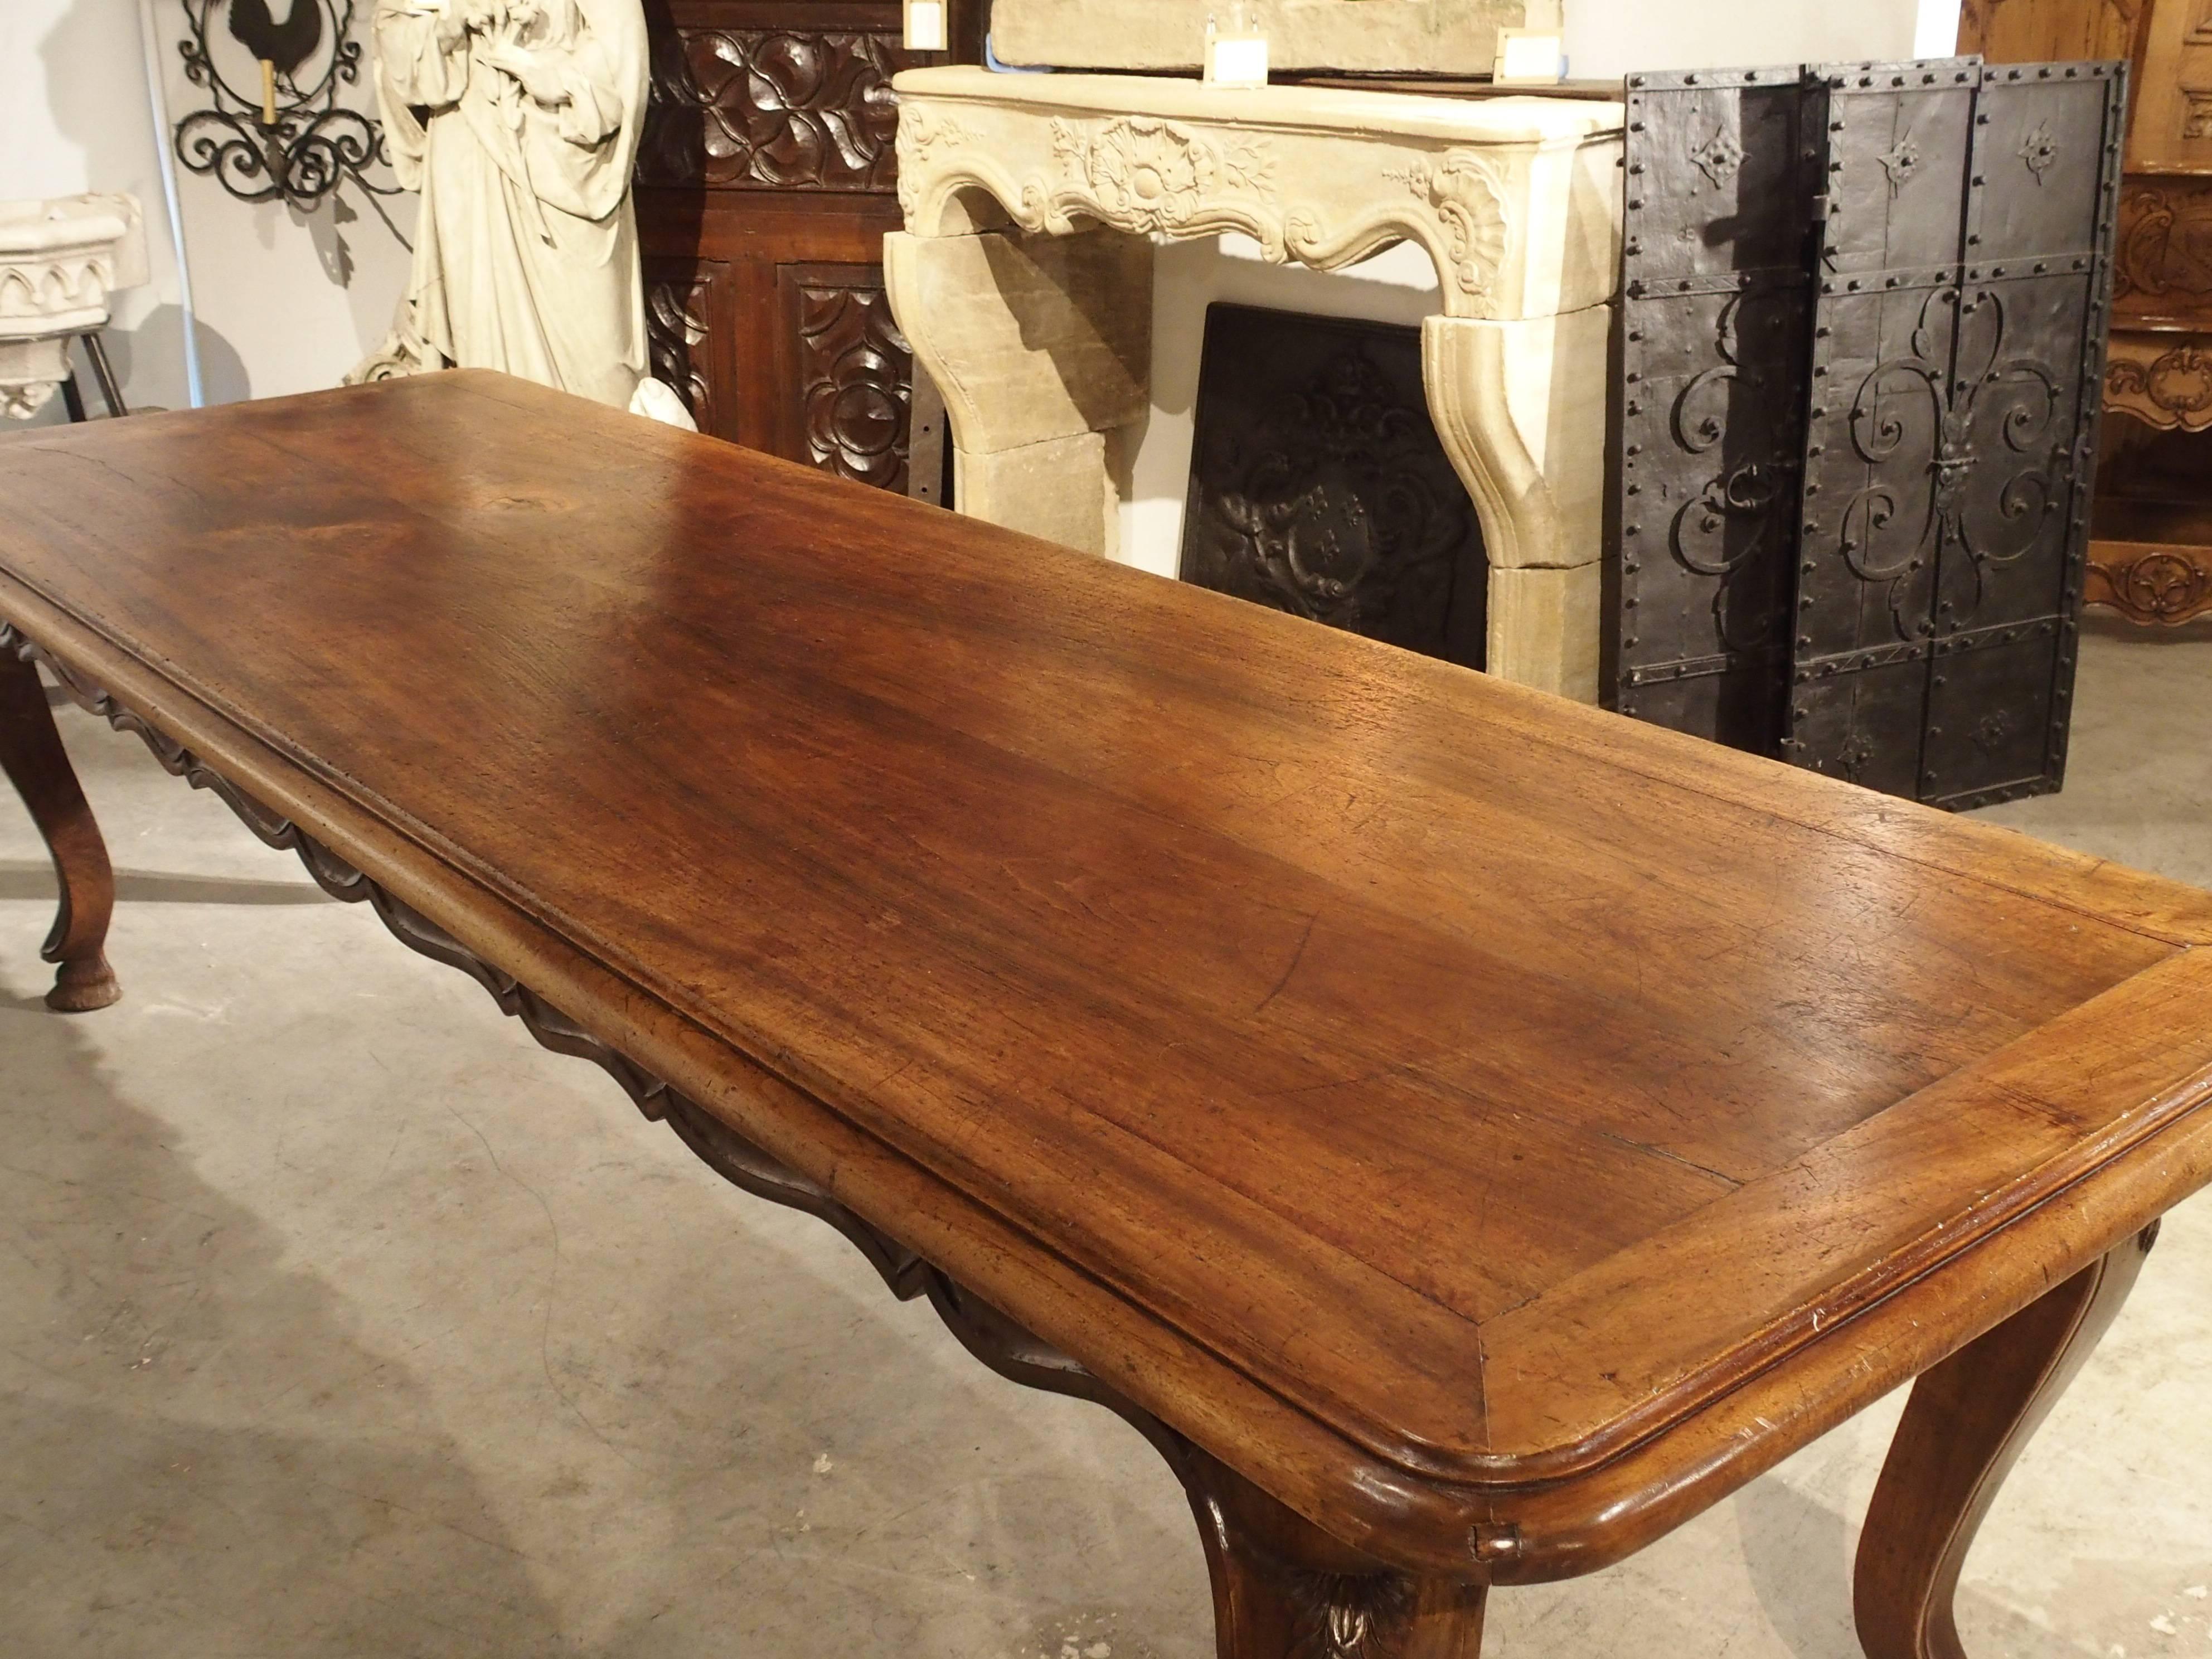 19th Century Unusual Antique French Walnut Wood Dining Table, Mid-1800s